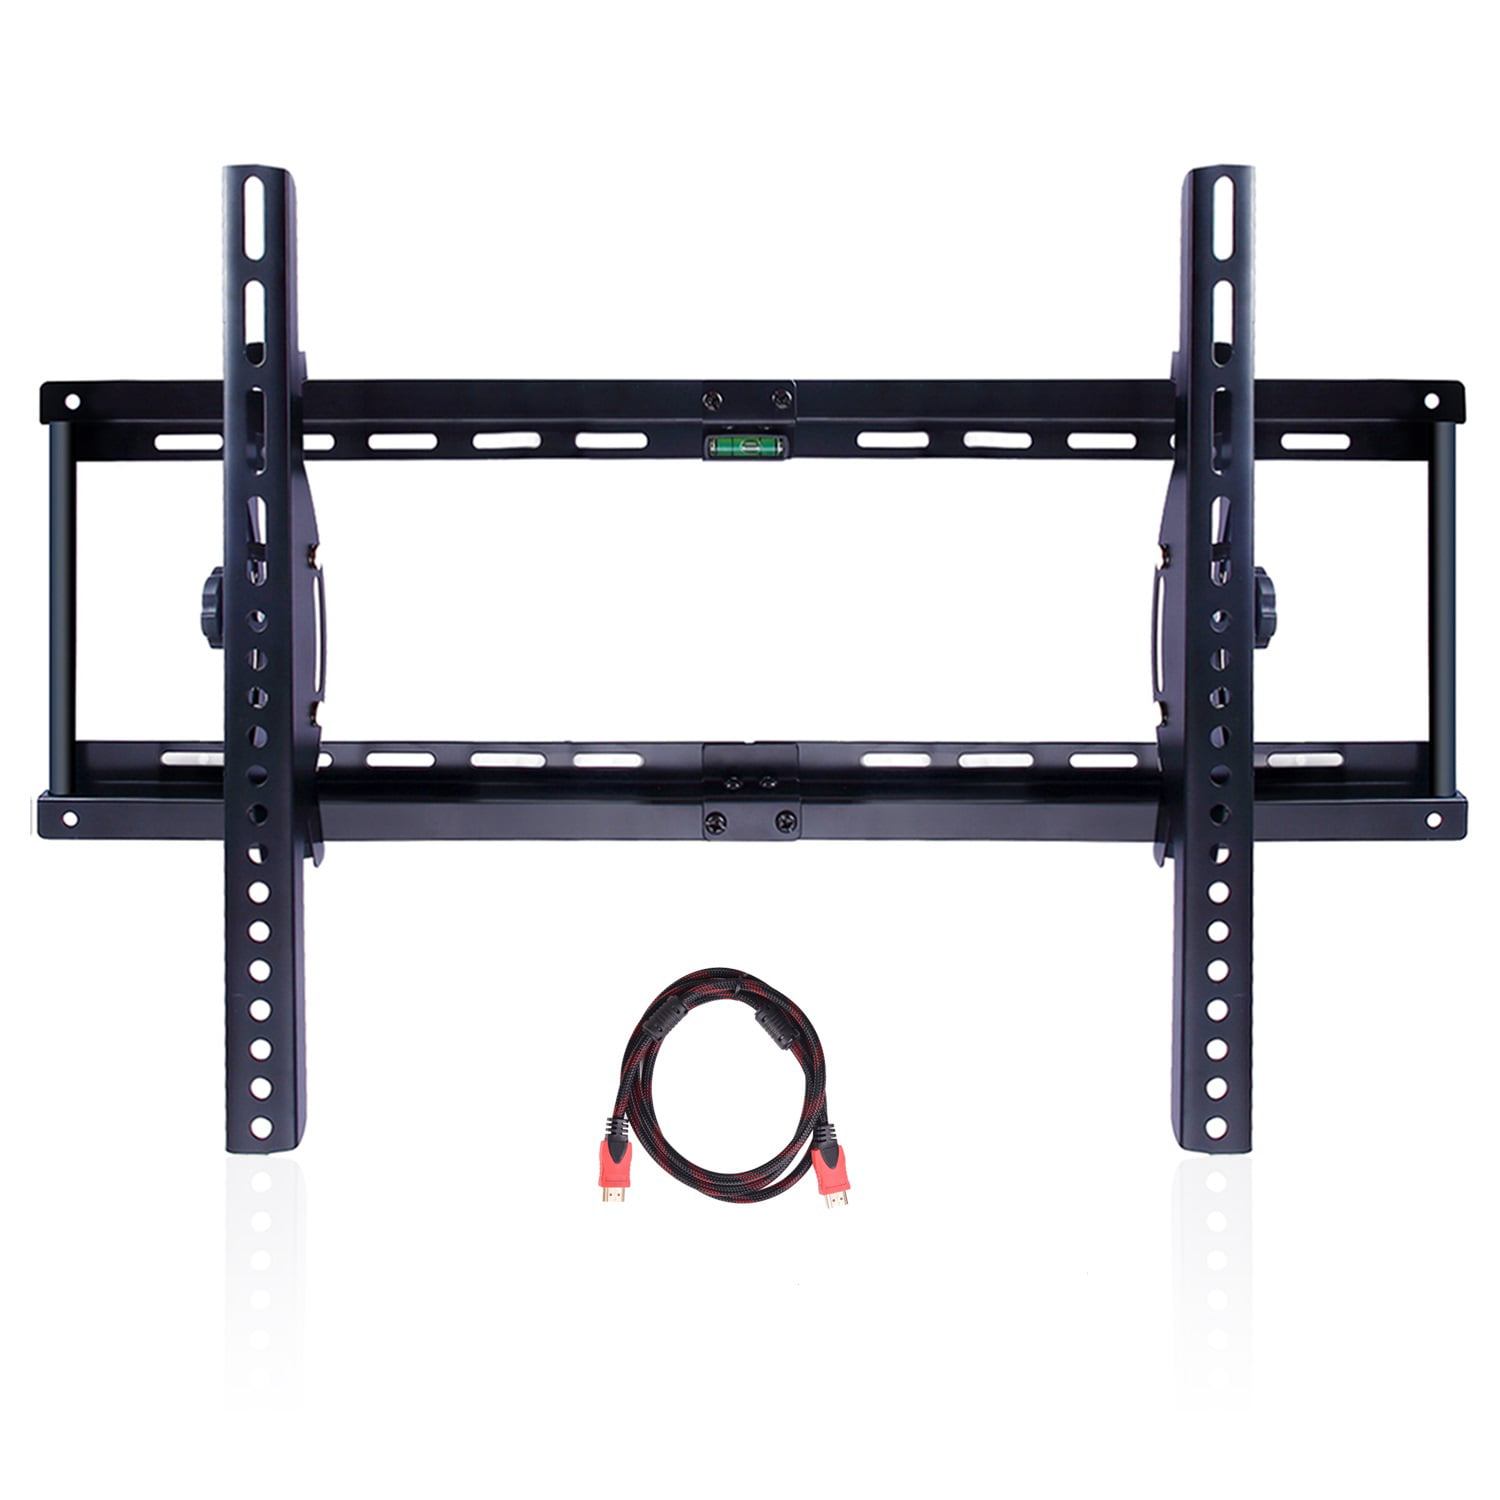 Tilting  TV Wall Mount Bracket For 32-70 Inches LCD/LED/PLASMA Flat TV 